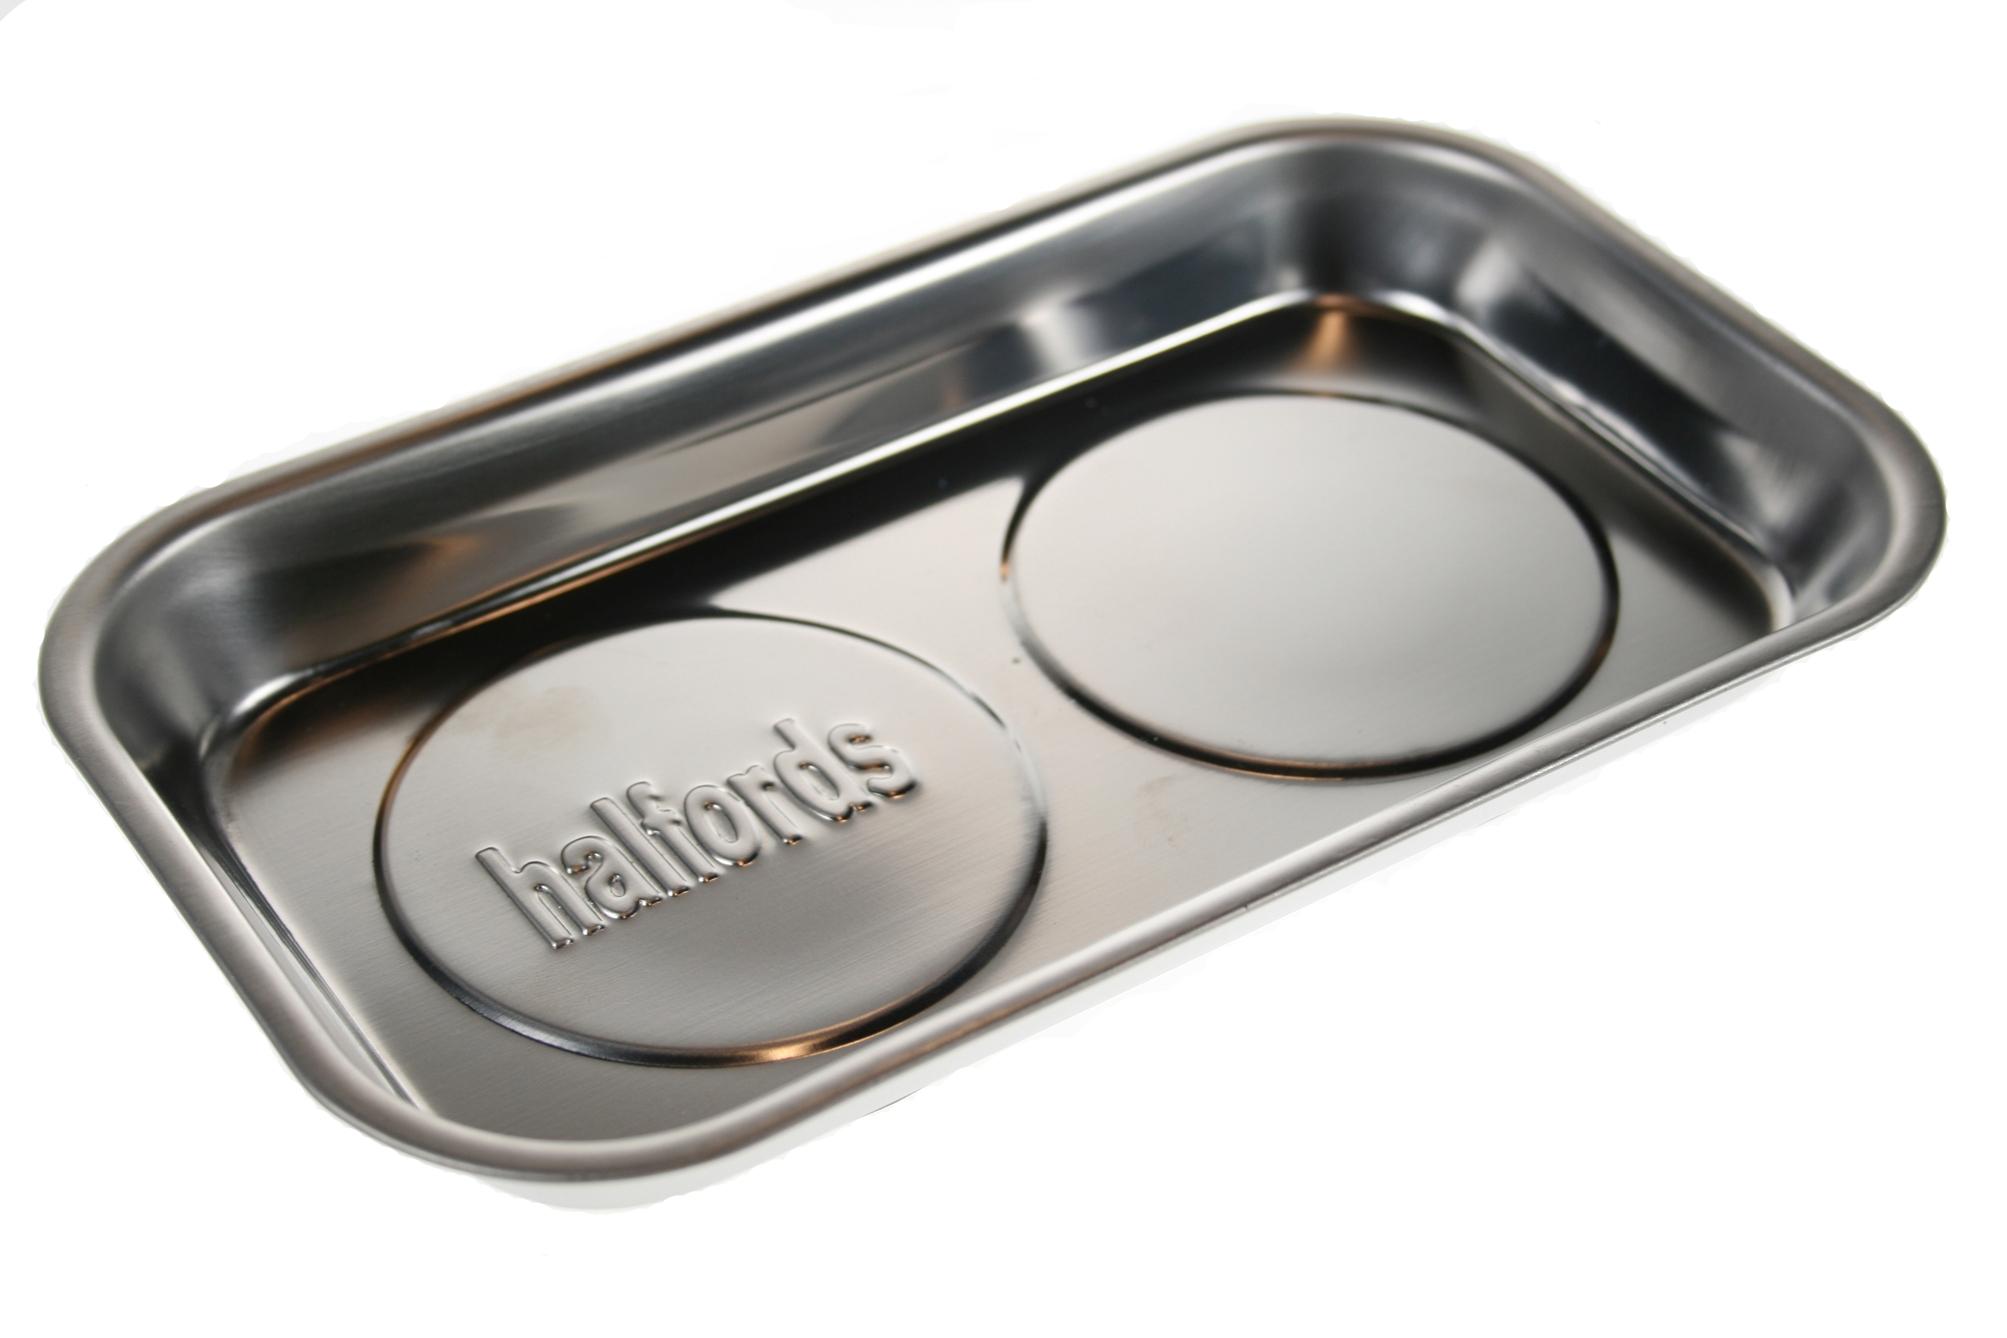 Halfords Magnetic Tray